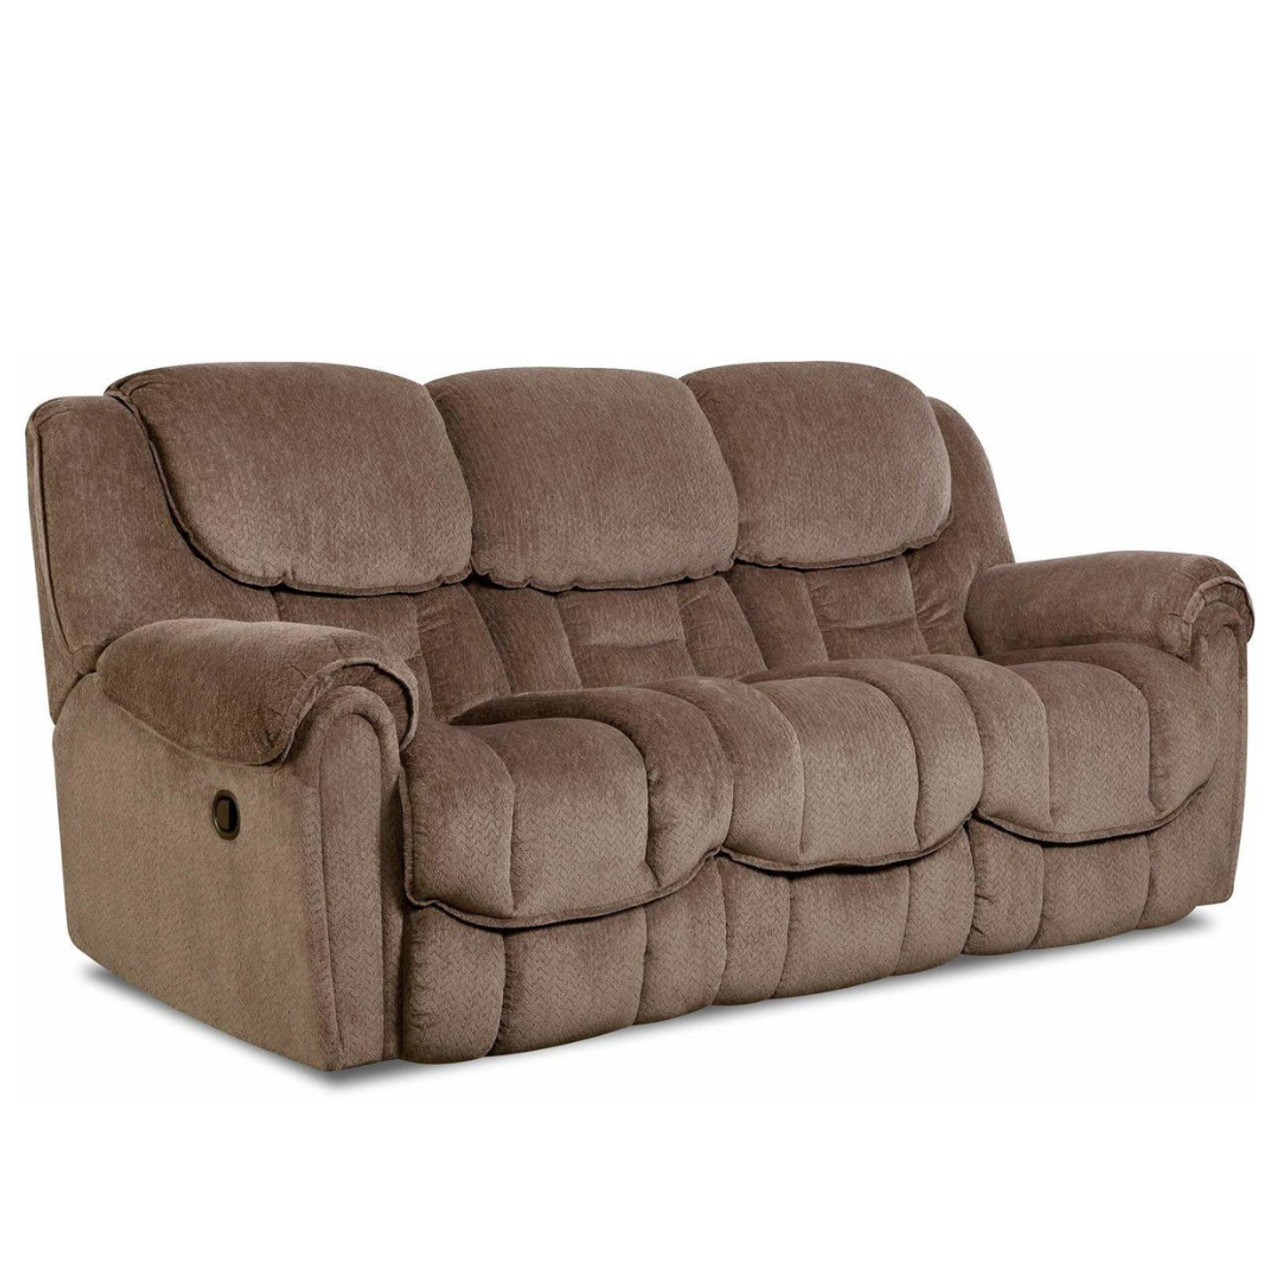 DEL MAR RECLINING SOFA/COUCH TAUPE